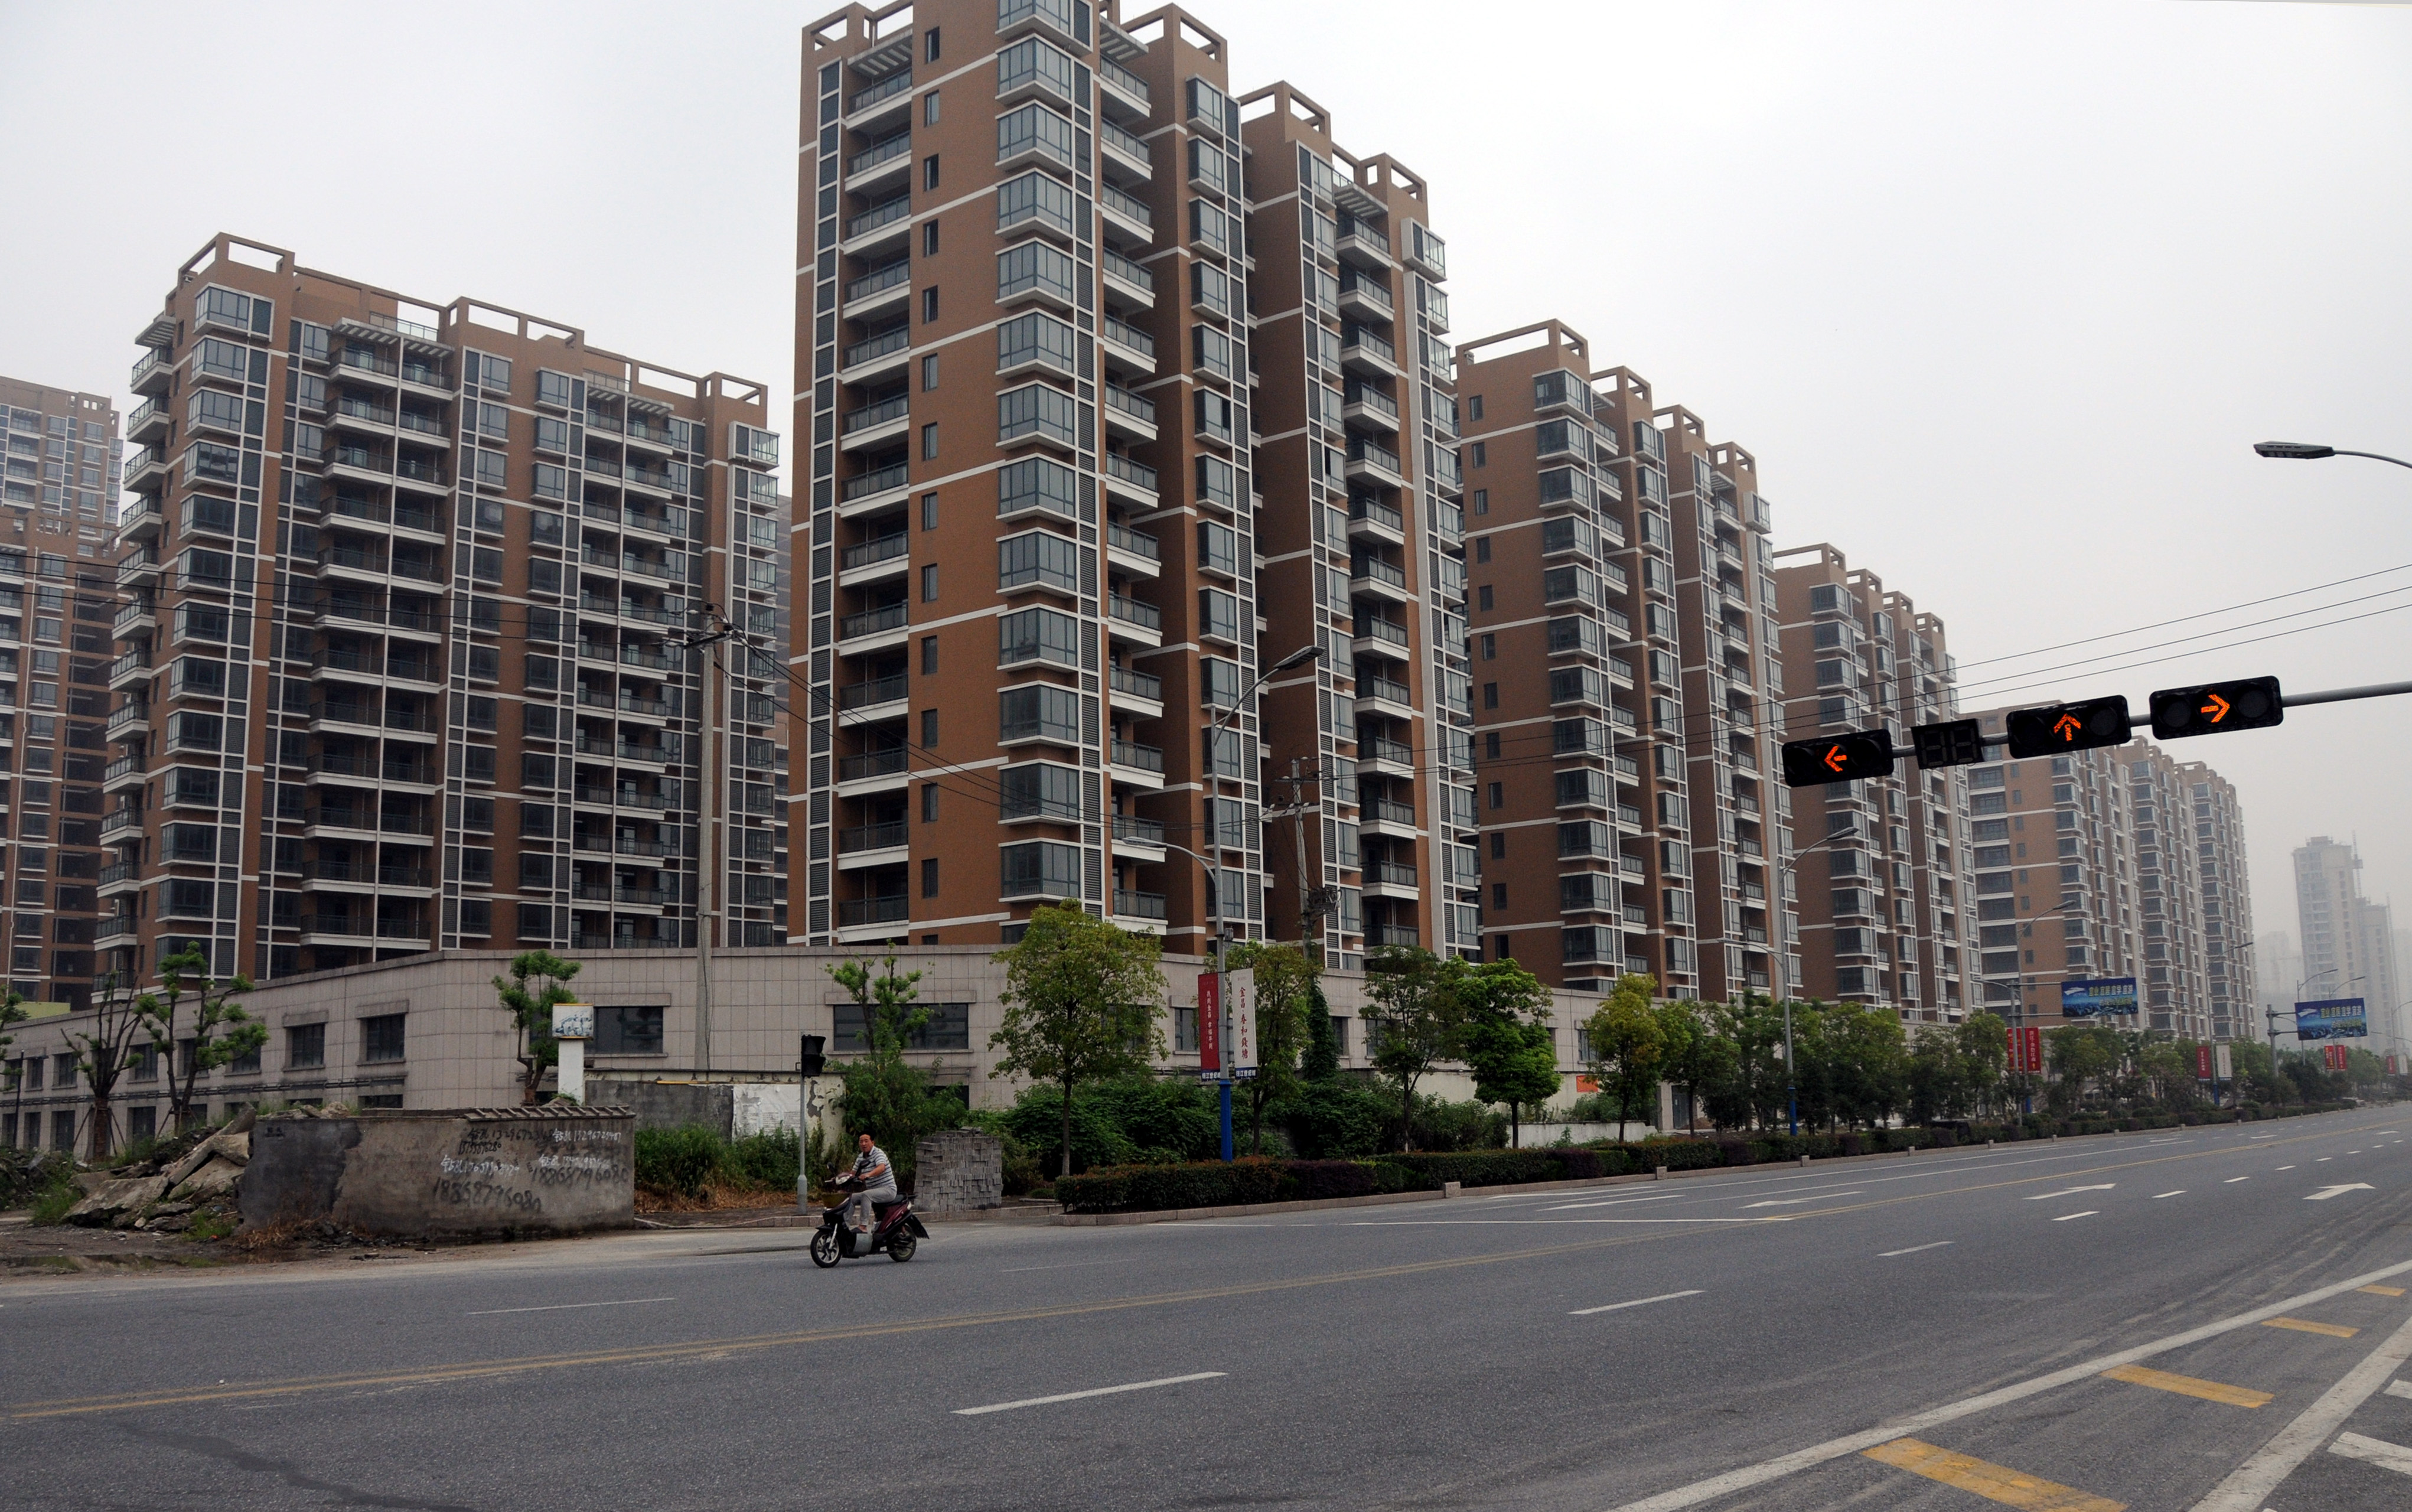 (140829) -- HANGZHOU, Aug. 29, 2014 (Xinhua) -- Photo taken on Aug. 29, 2014 shows a high-grade residential buildings community and empty roads in Hangzhou, capital of east China's Zhejiang Province. The housing security and management bureau of Hangzhou lifted three-year-old restrictions on homes smaller than 140 square meters from Aug. 29 due to sluggish sales and overstock. China's property market saw a weak first half of the year, prompting dozens of cities nationwide to remove housing purchase limits in a bid to revive sales and boost the economy. (Xinhua/Wang Dingchang) (lfj)